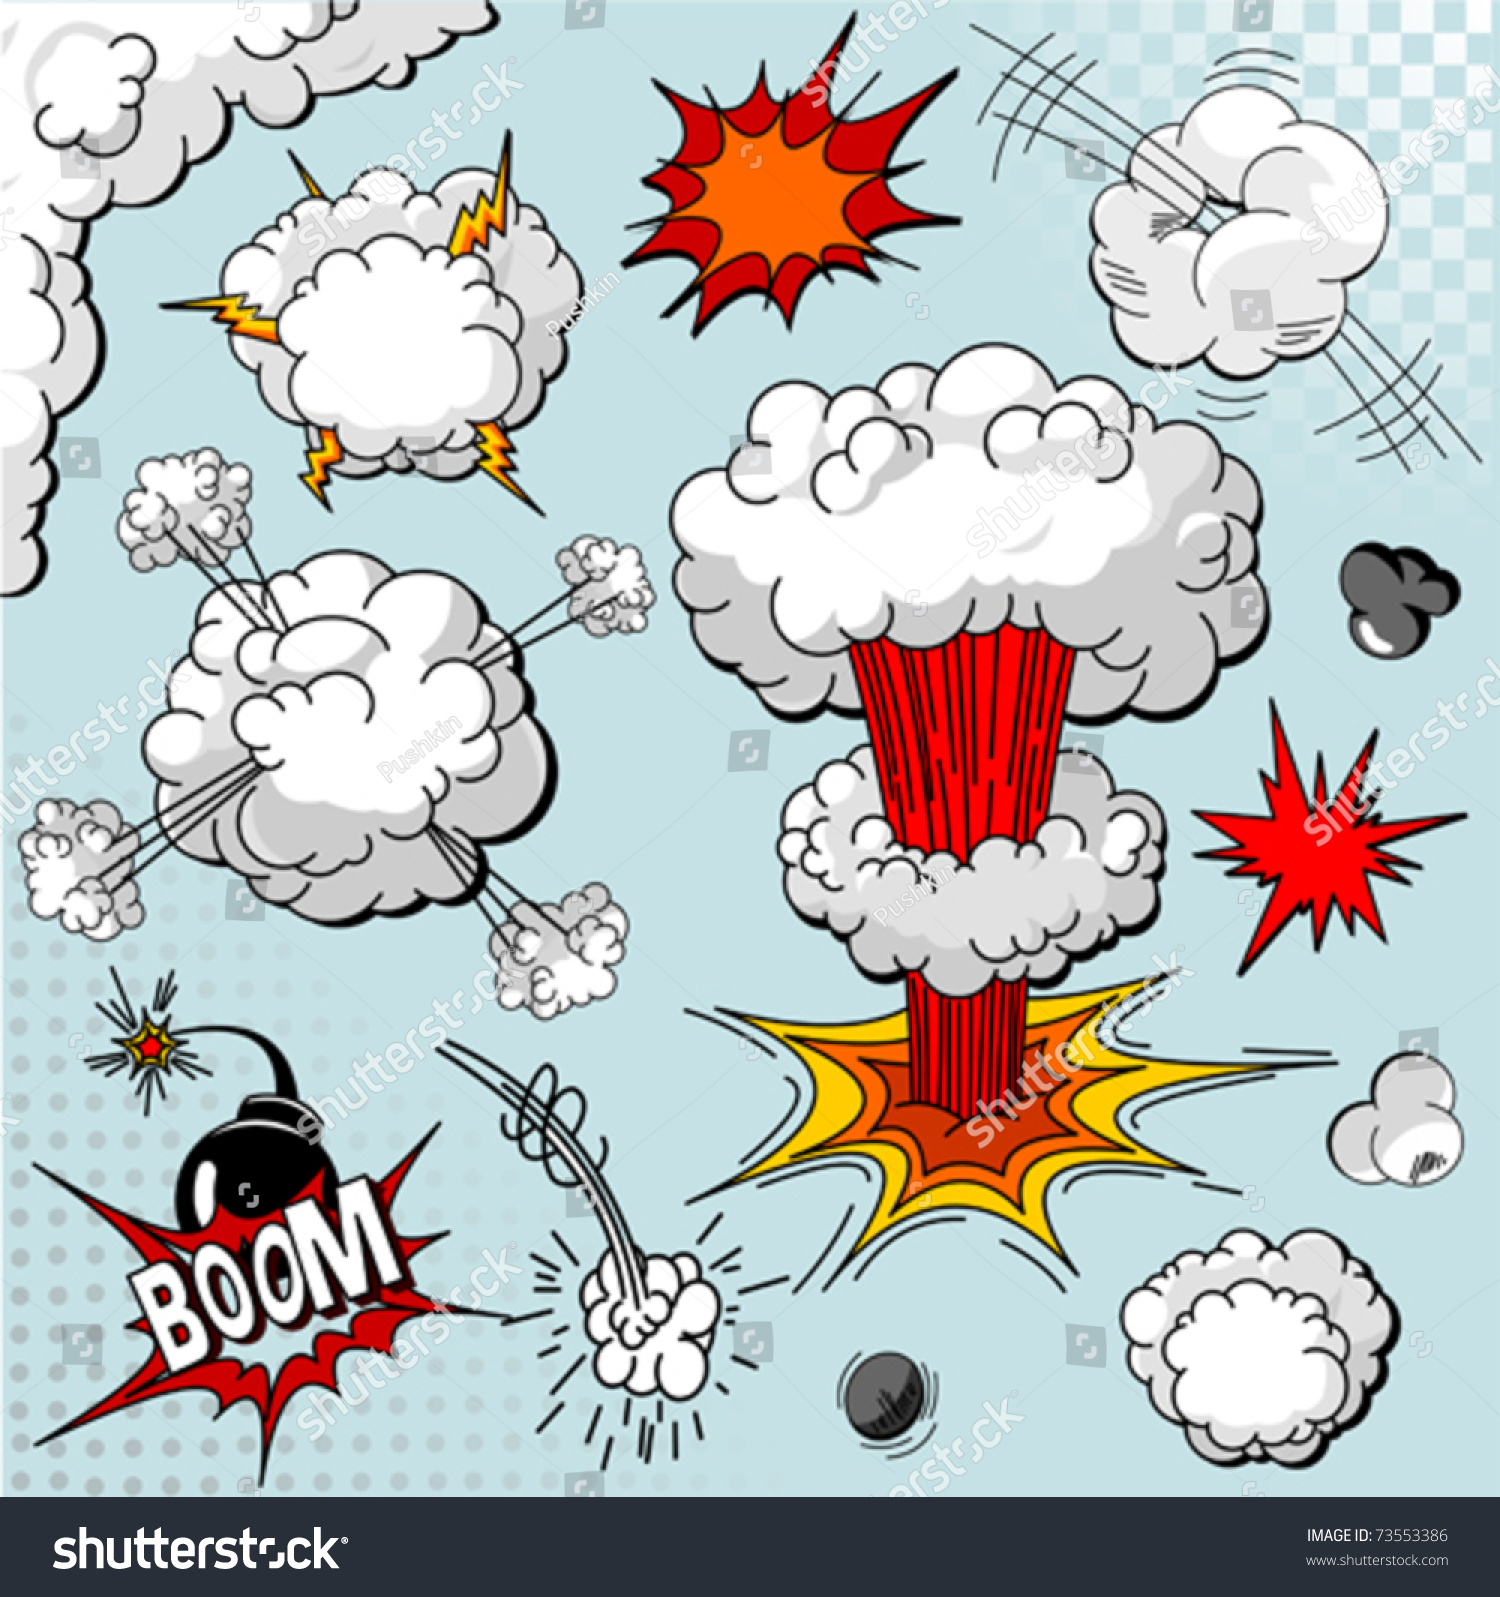 Comic Book Explosion Elements For Your Design Stock Vector Illustration 73553386 Shutterstock 